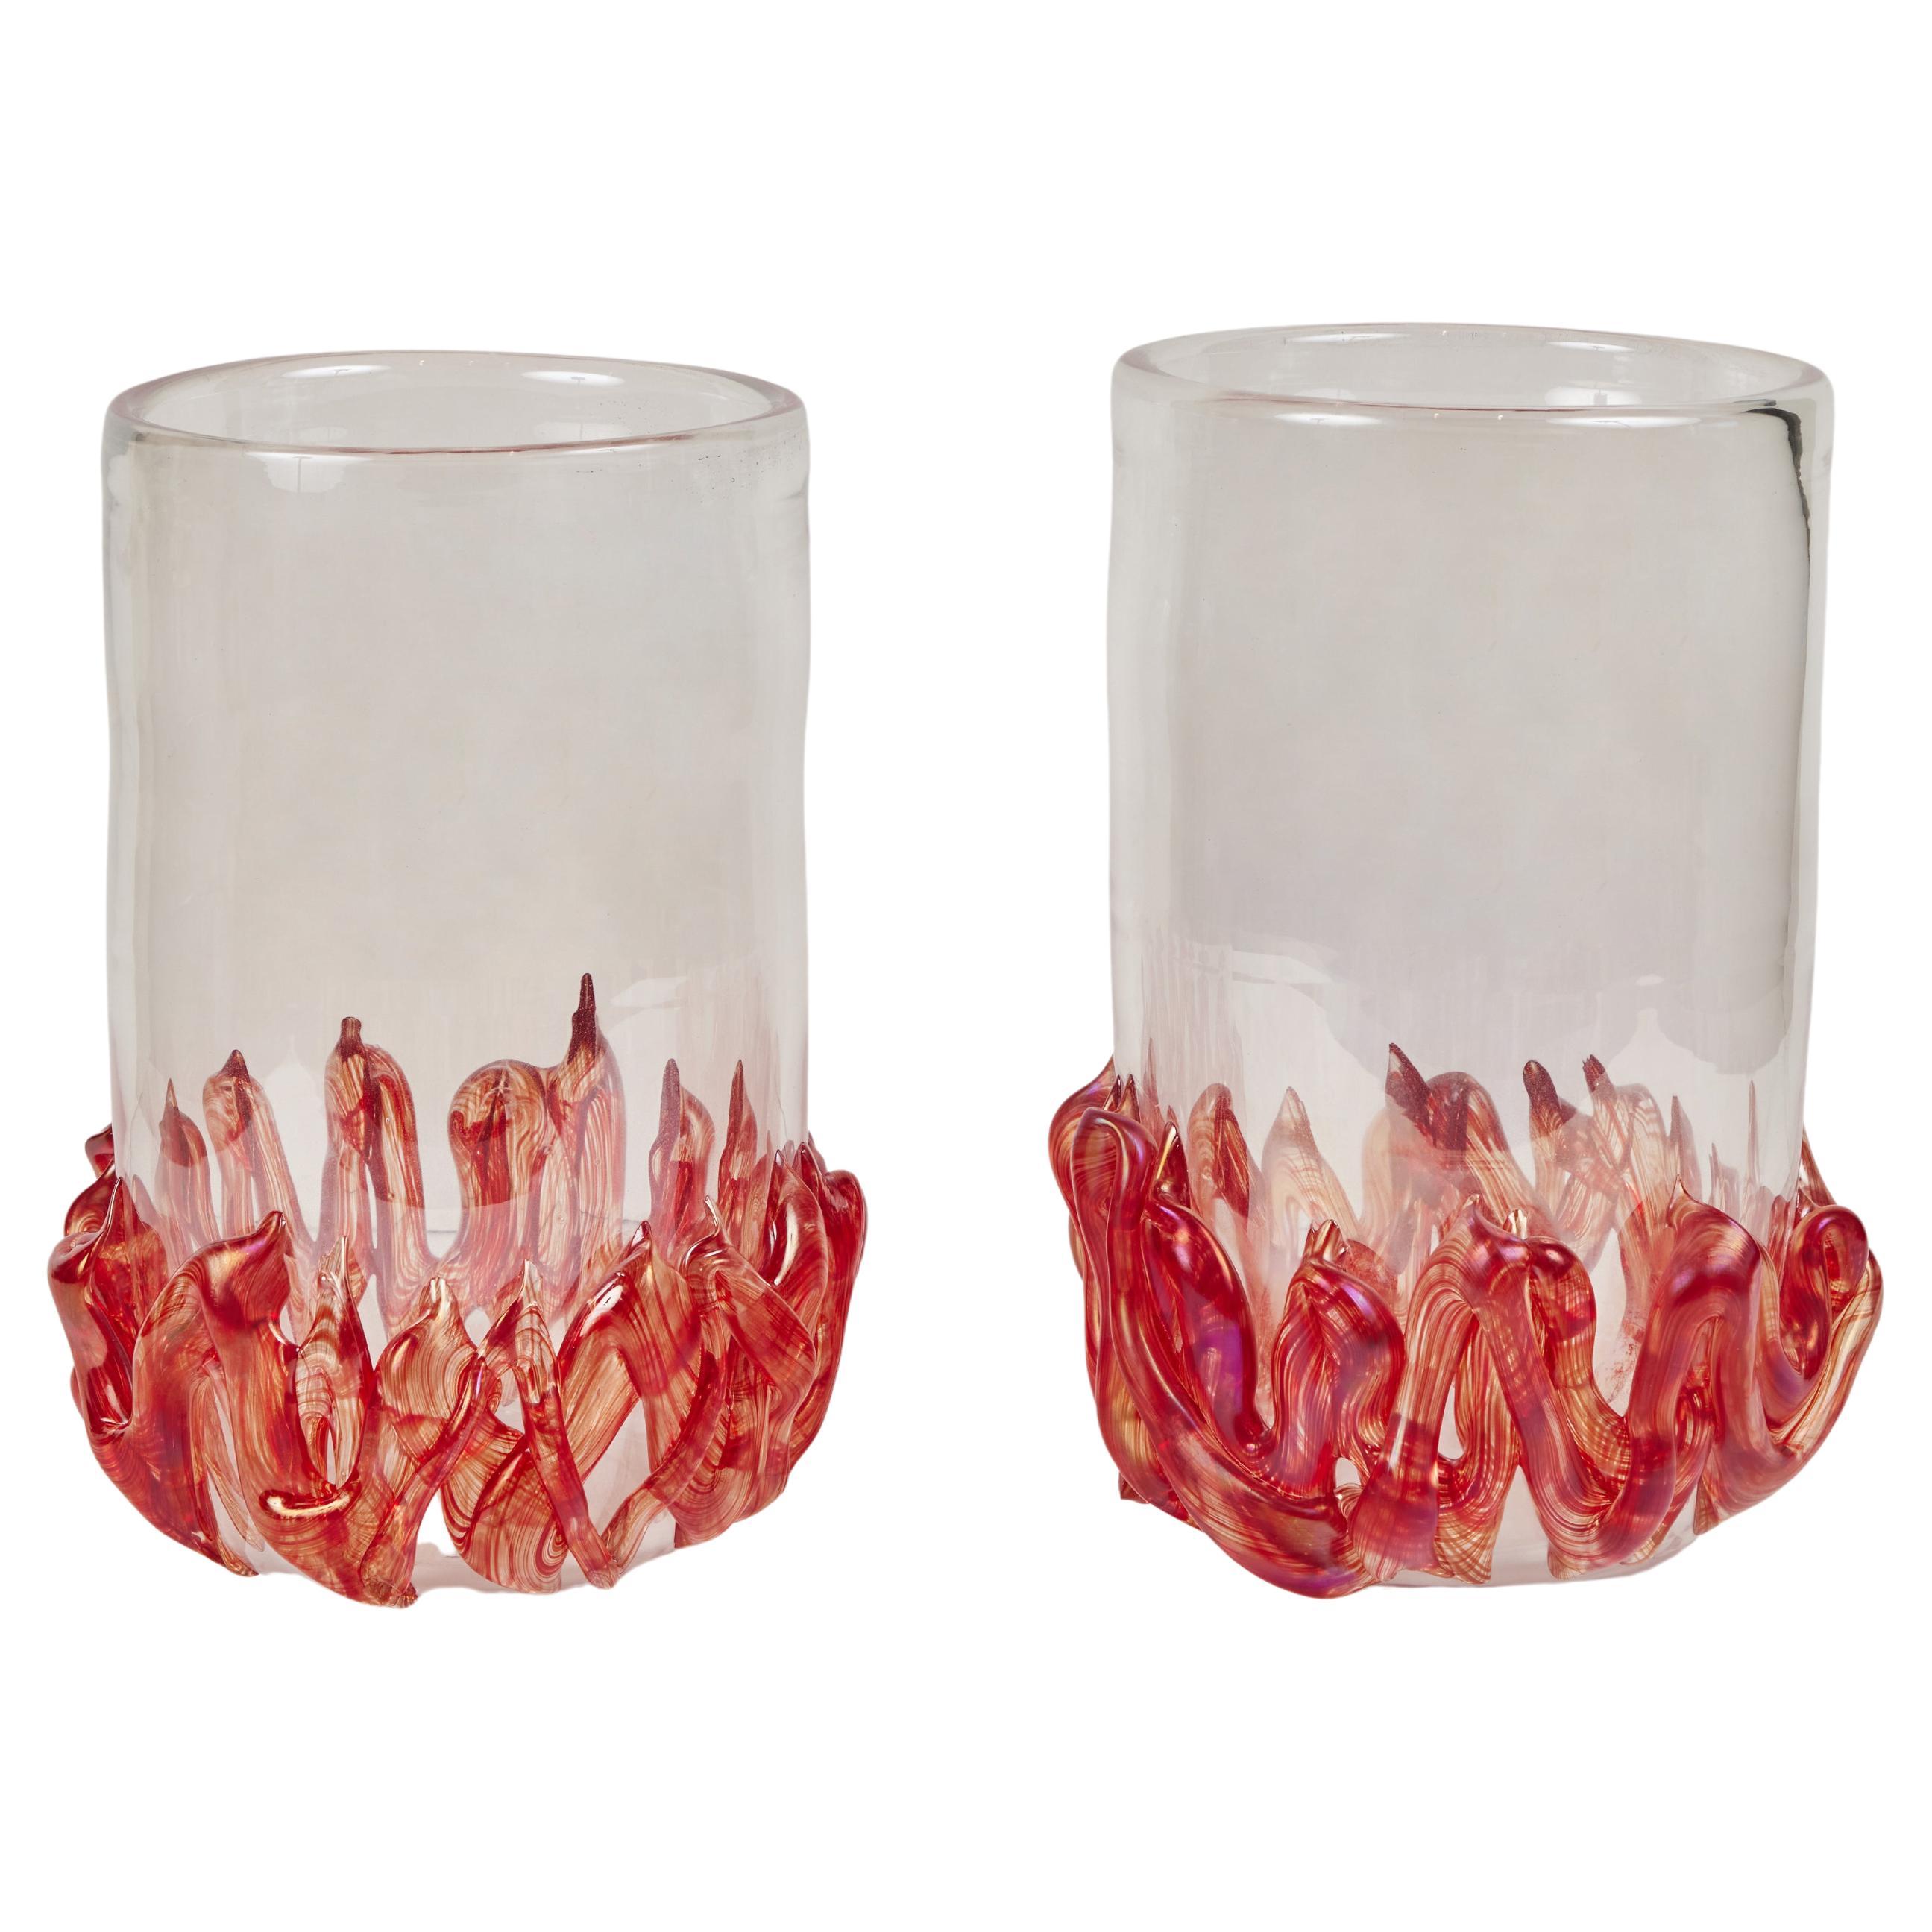 Signed Pair of Murano Glass Vases with Flame Detail